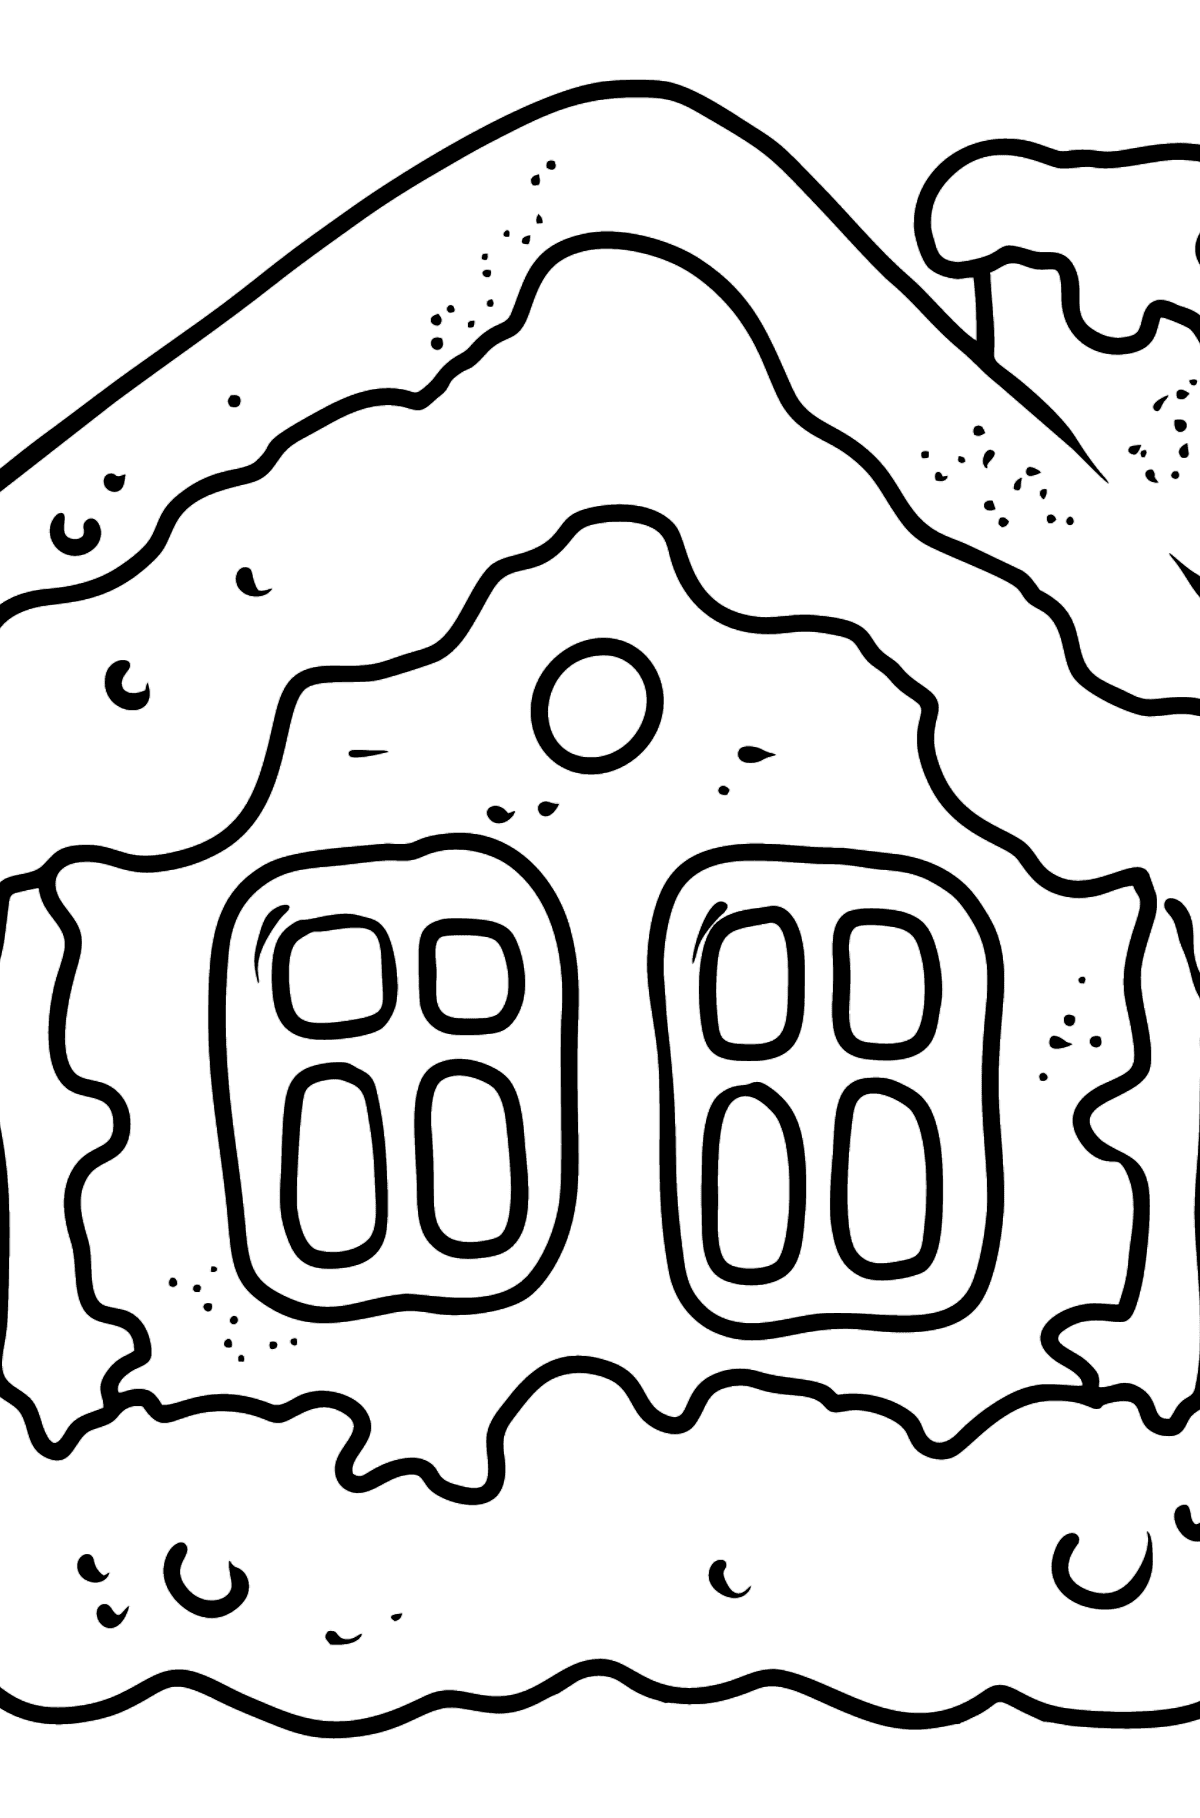 Gingerbread House coloring page - Coloring Pages for Kids